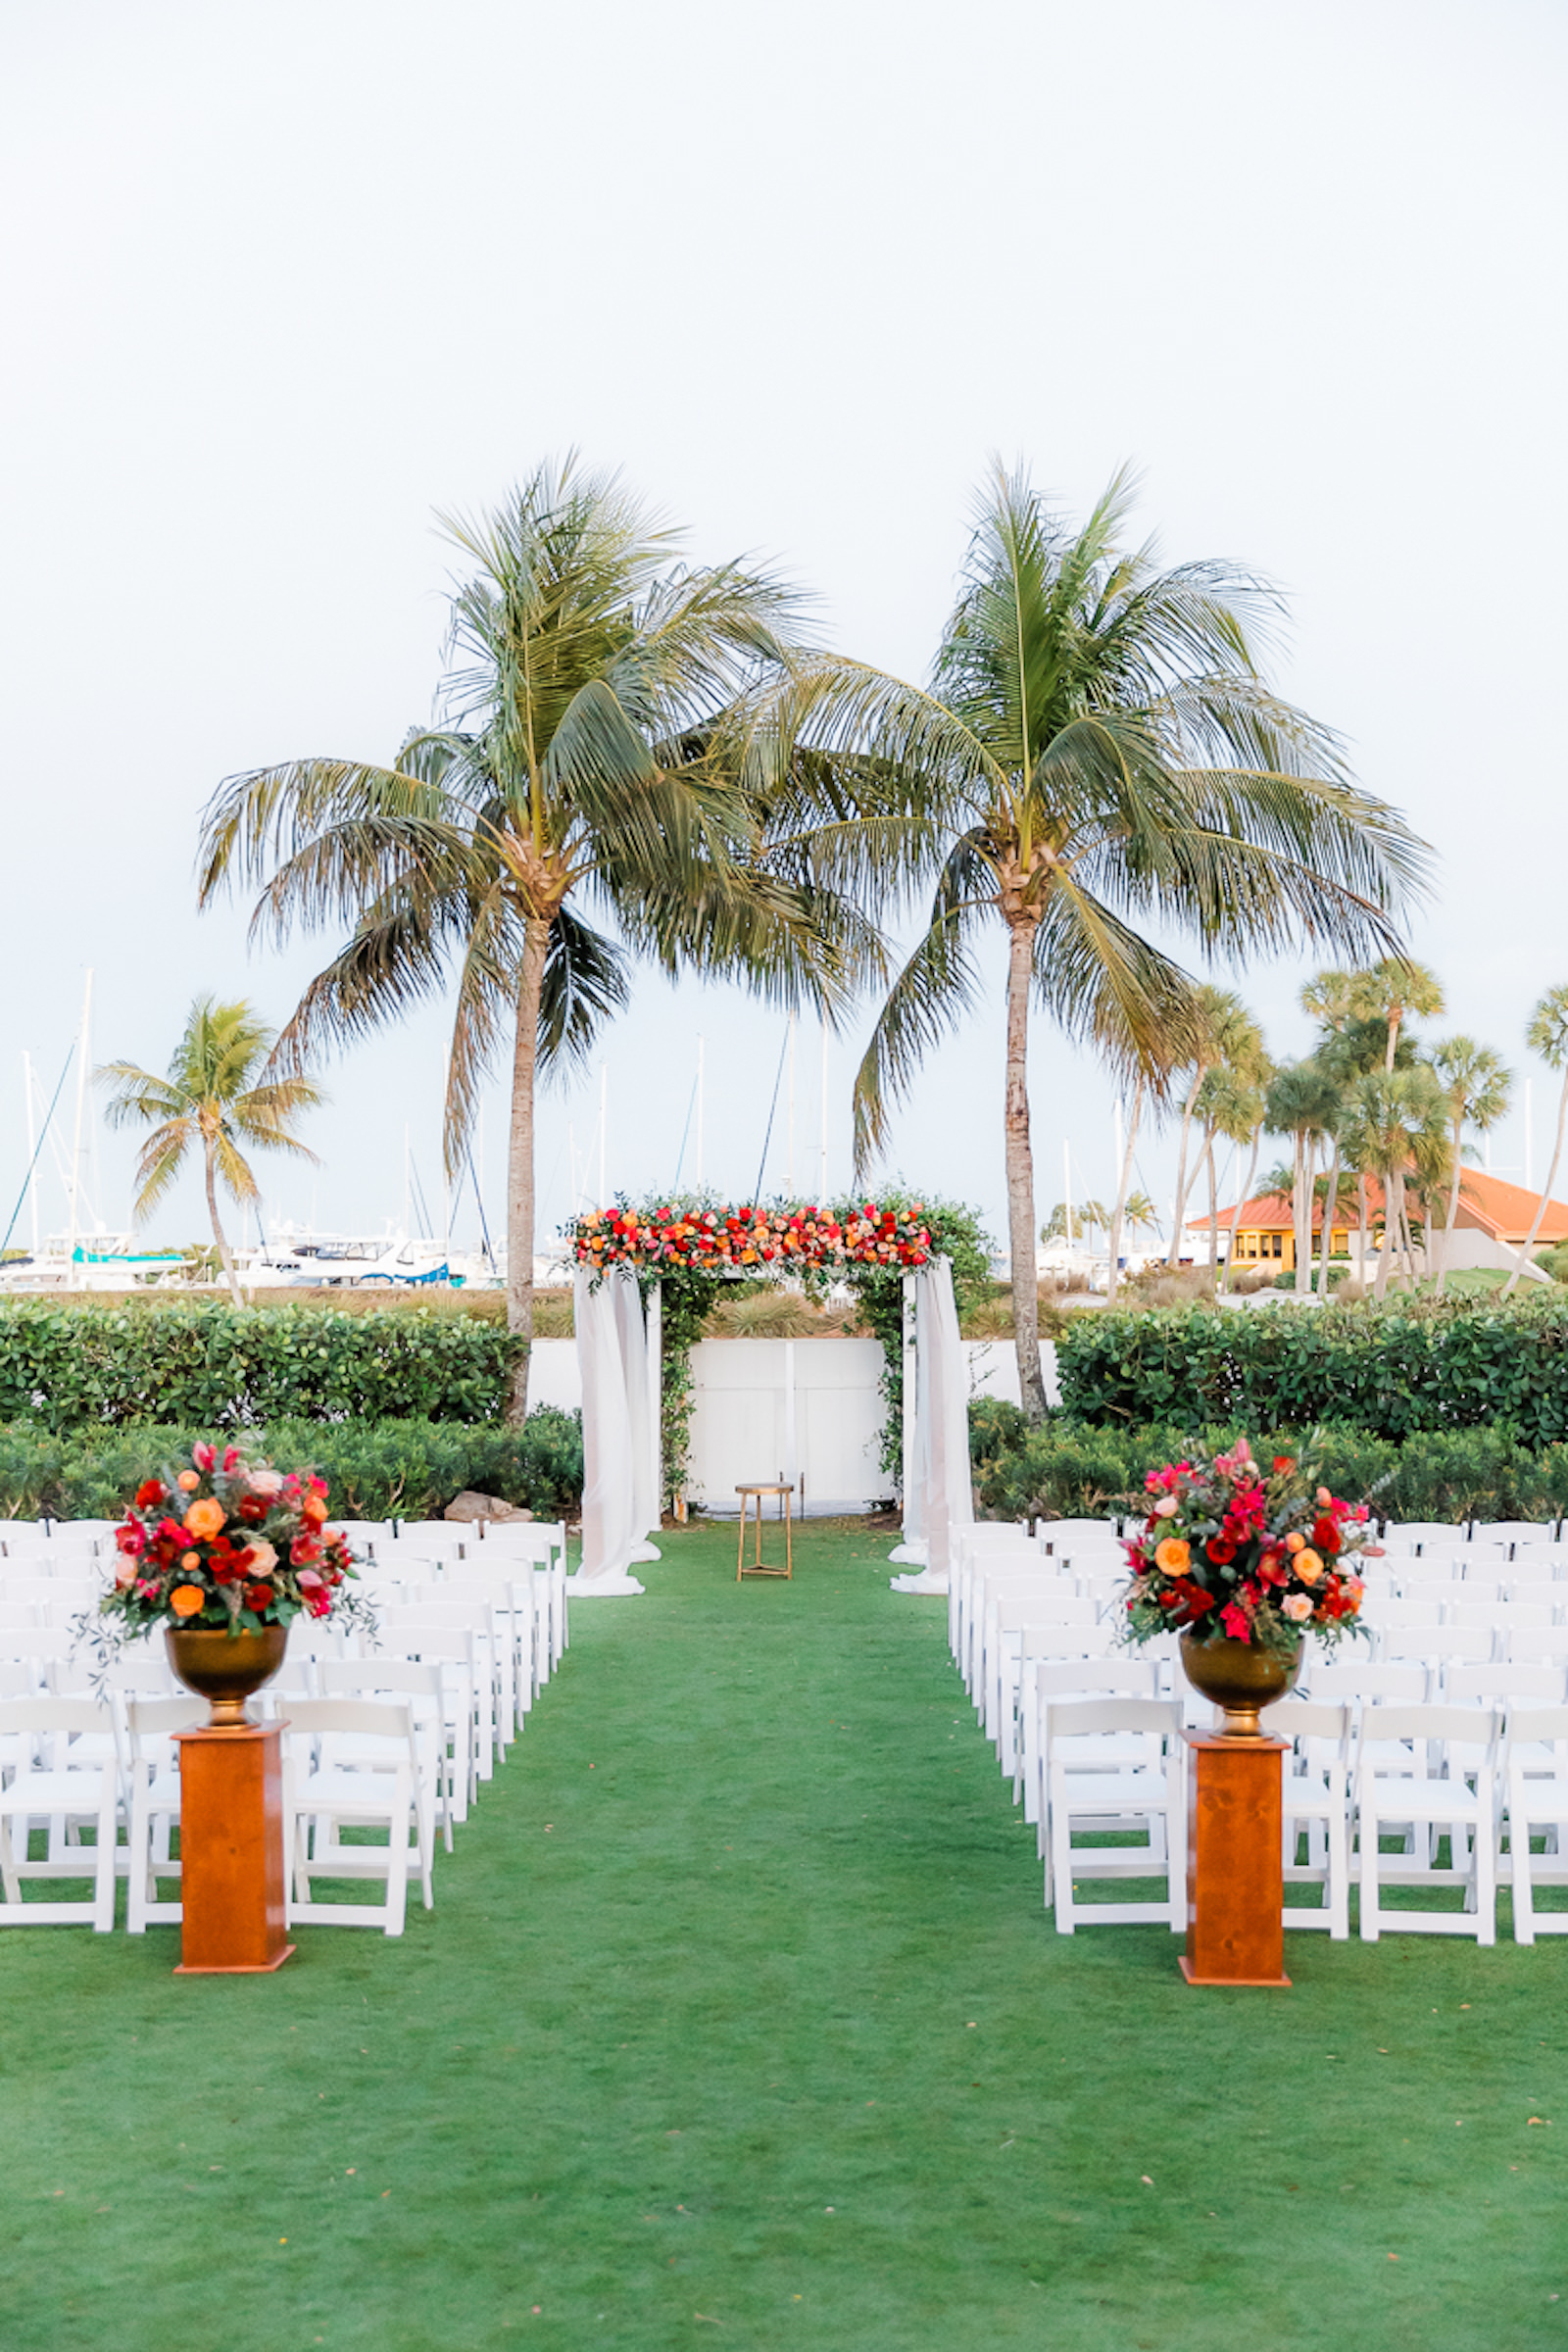 Elegant Waterfront Outdoor Garden Wedding Ceremony Decor, White Folding Chairs, Tall Wooden Aisle Pedestals with Jewel Tone Floral Arrangements, Arch with White Linens and Flowers | Tampa Bay Wedding Venue The Resort at Longboat Key Club